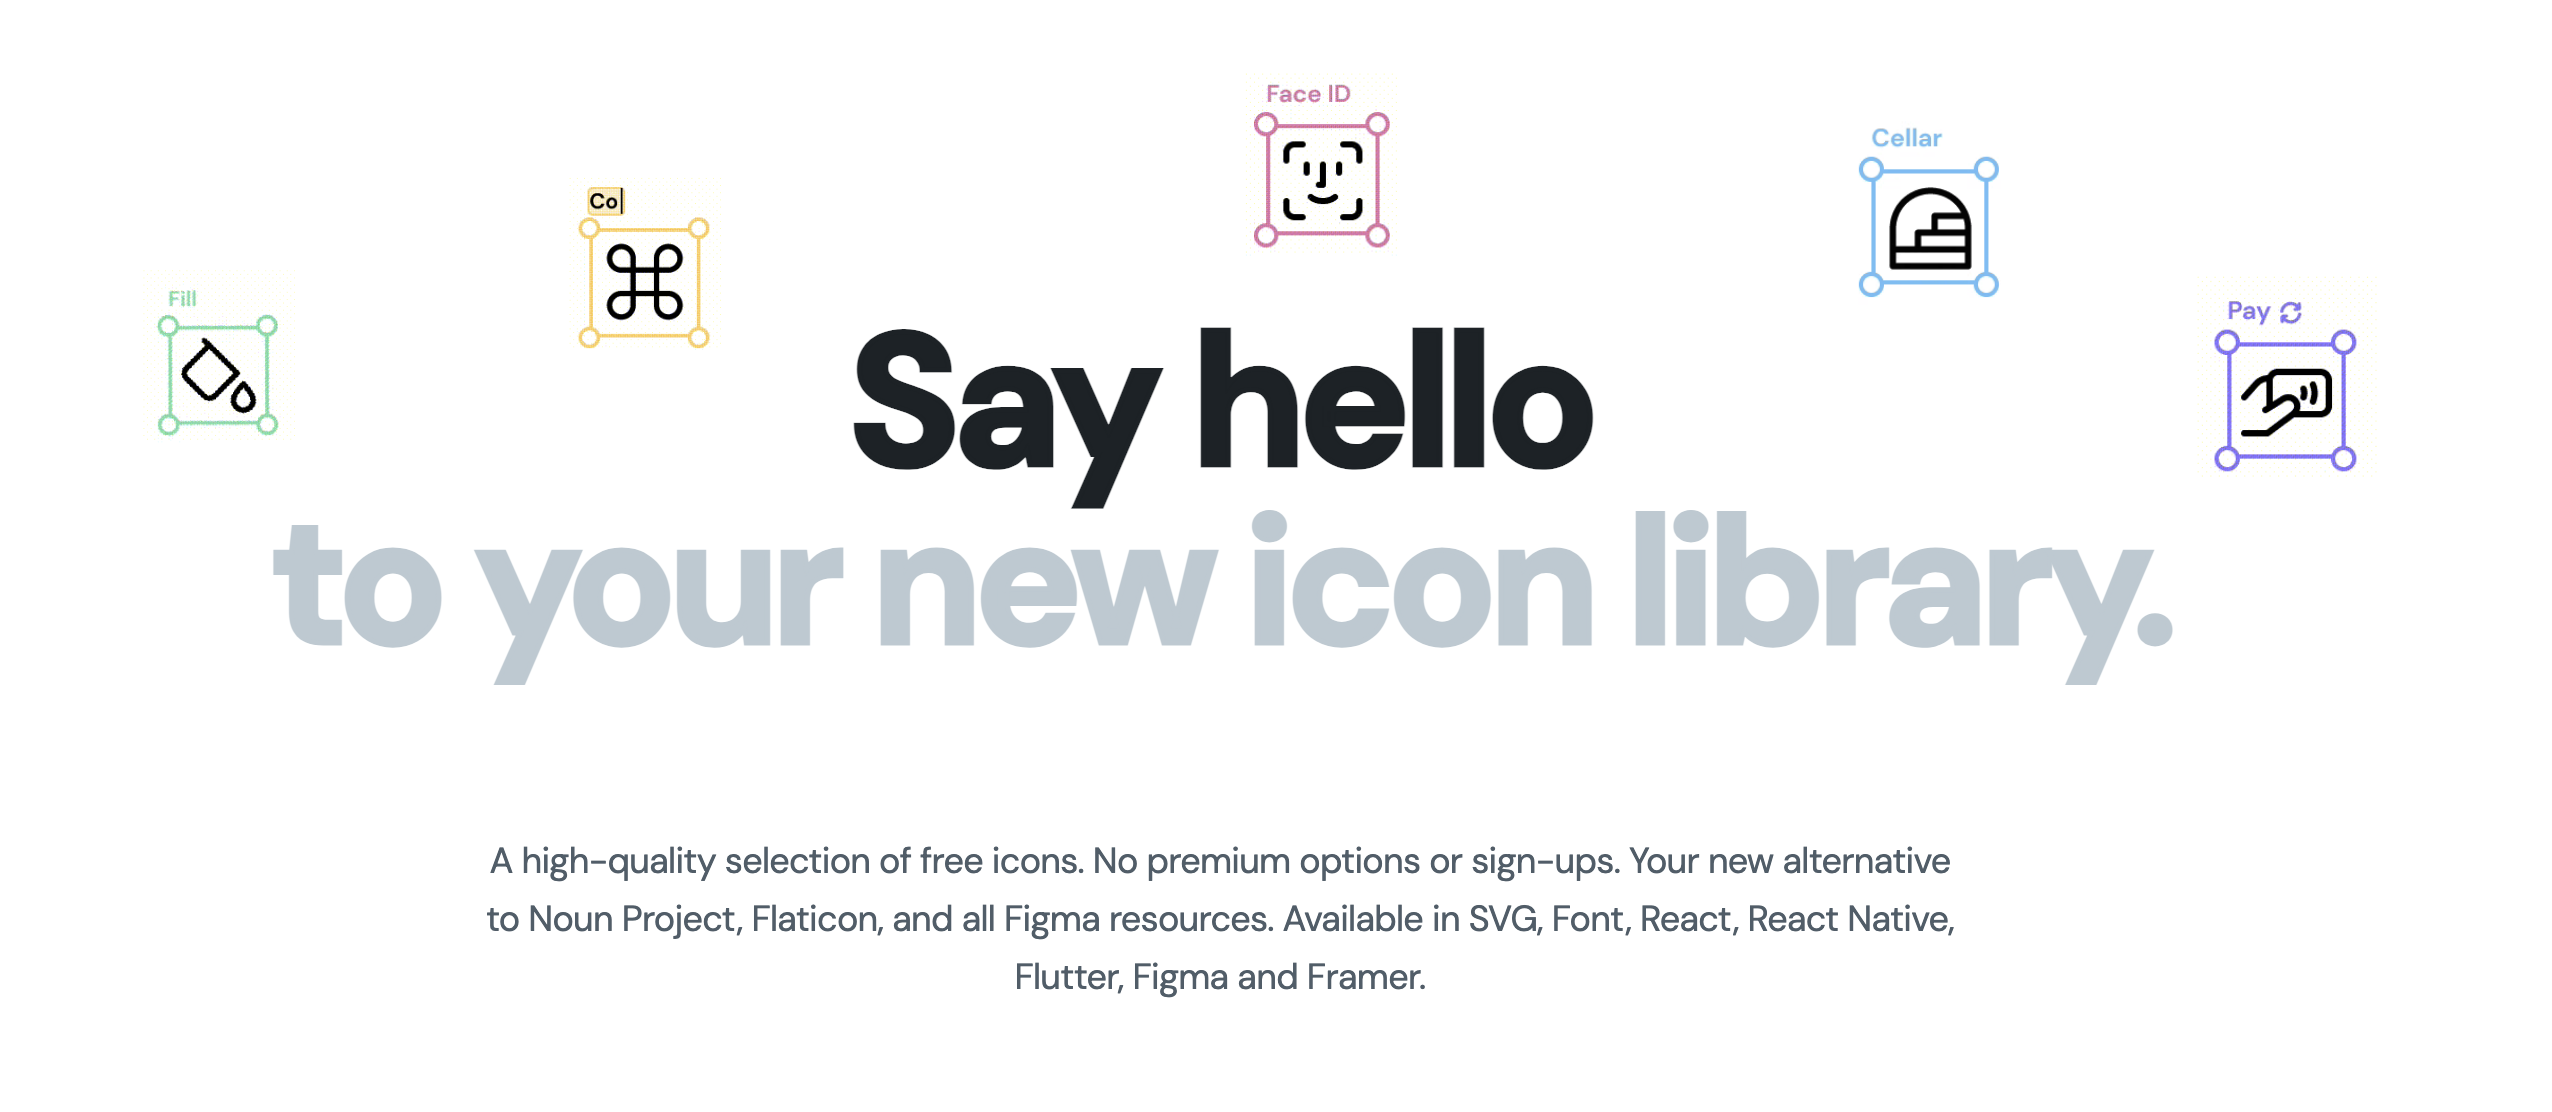 Iconior: Say hello to your new icon library - Post Image